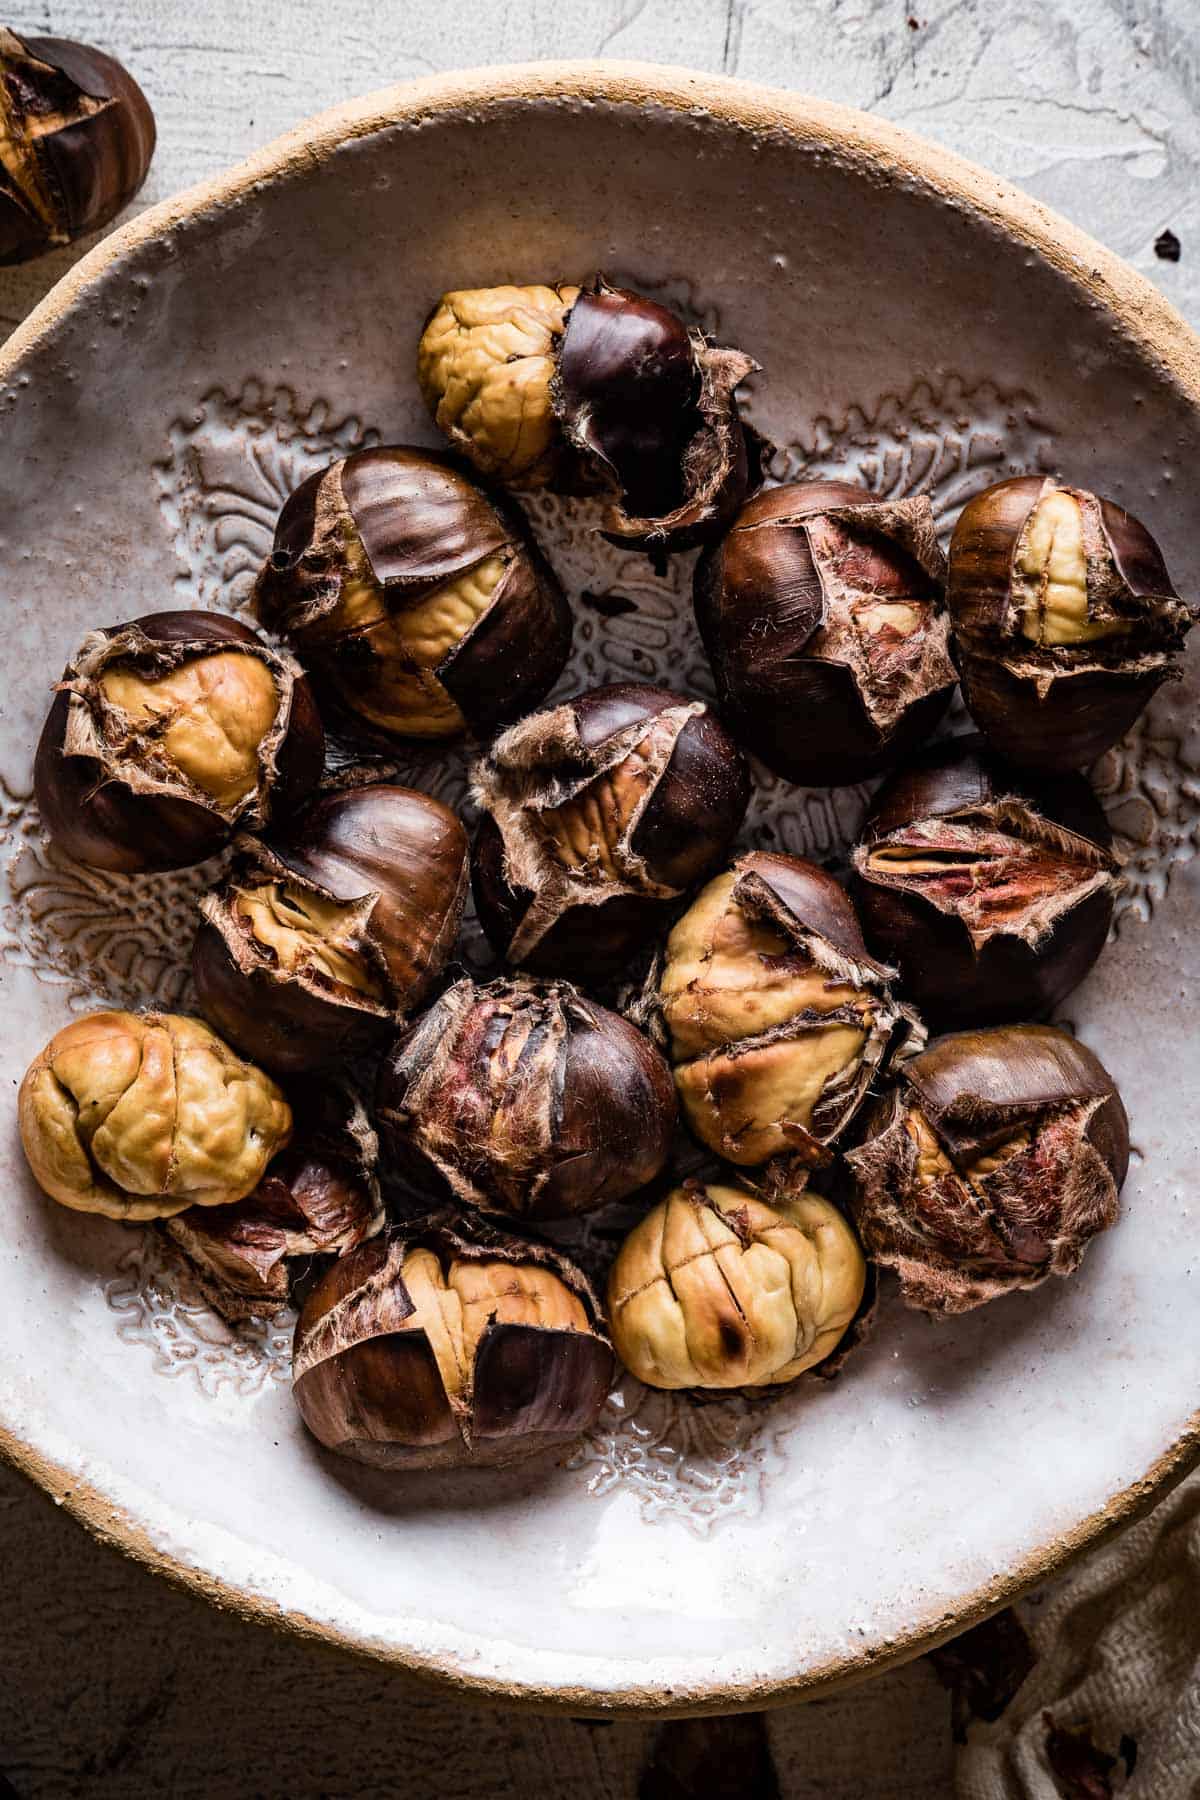 Roasted chestnuts in a bowl from top view